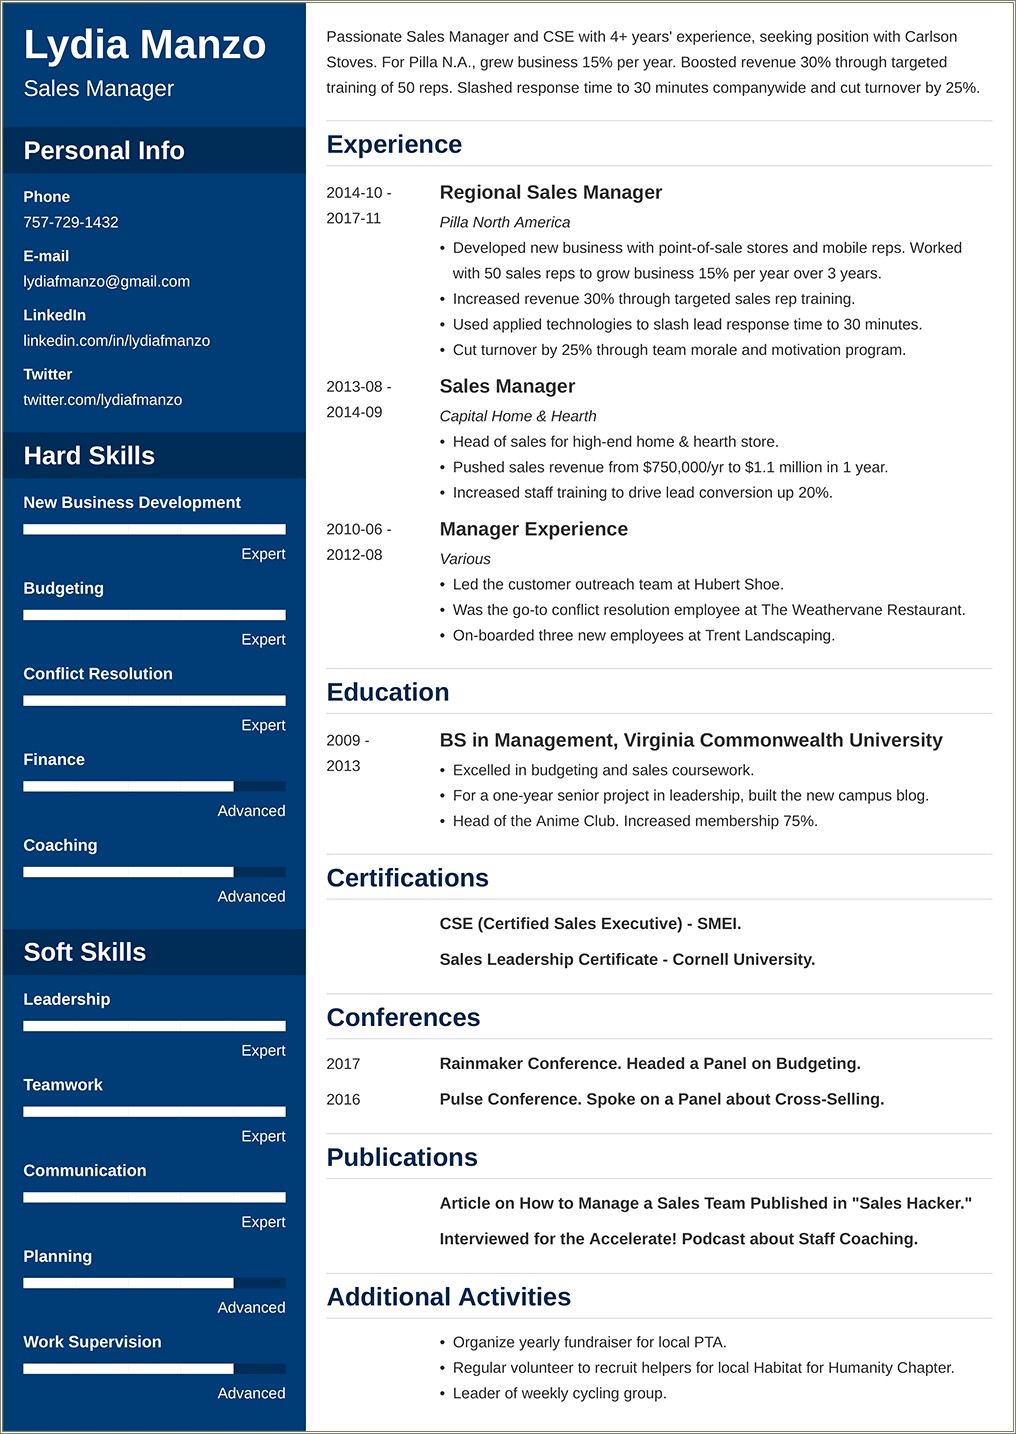 Resume Help Managed A Small Team